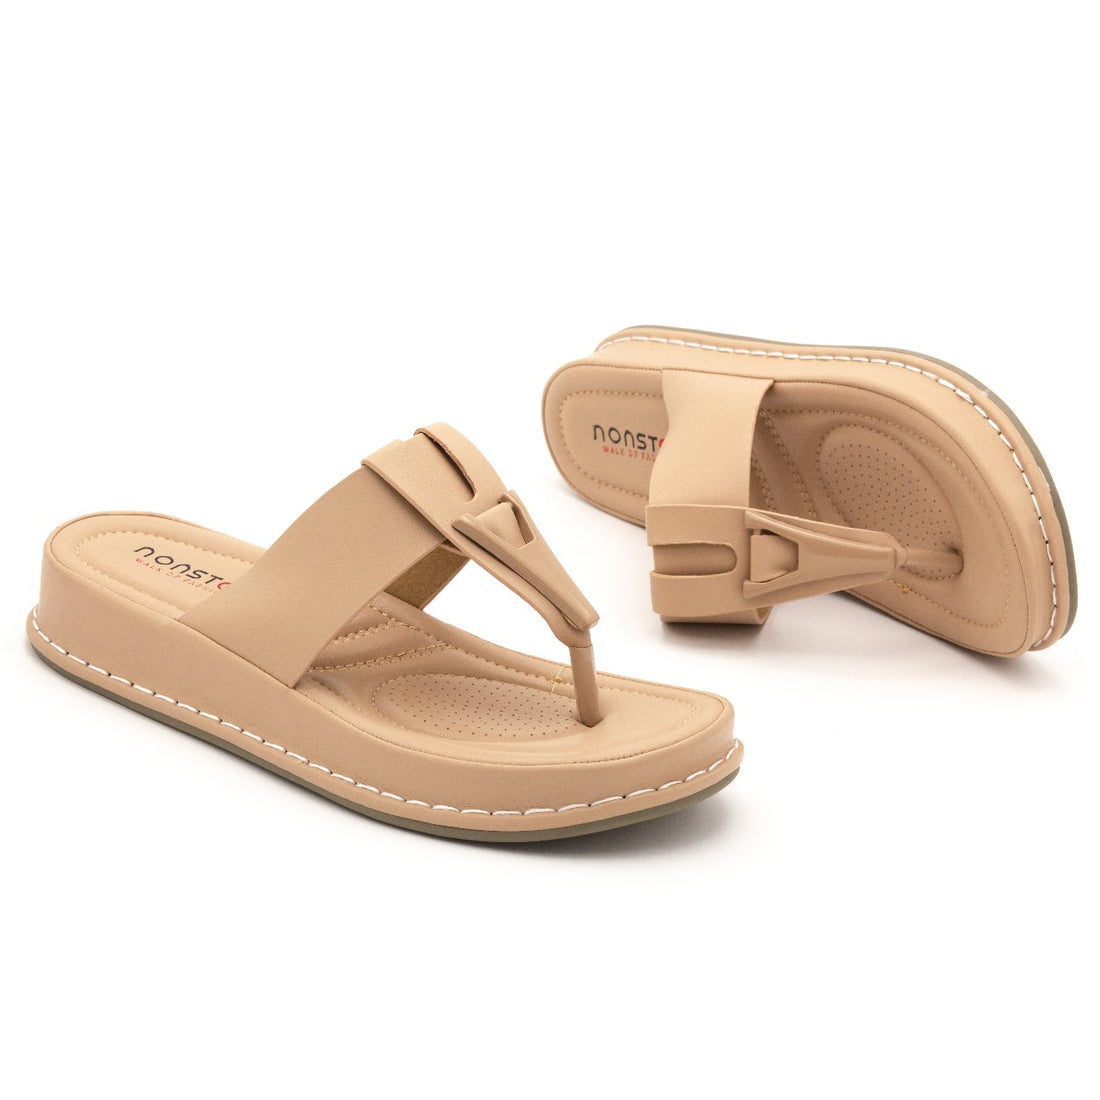 Ns70091 medicated flipflop